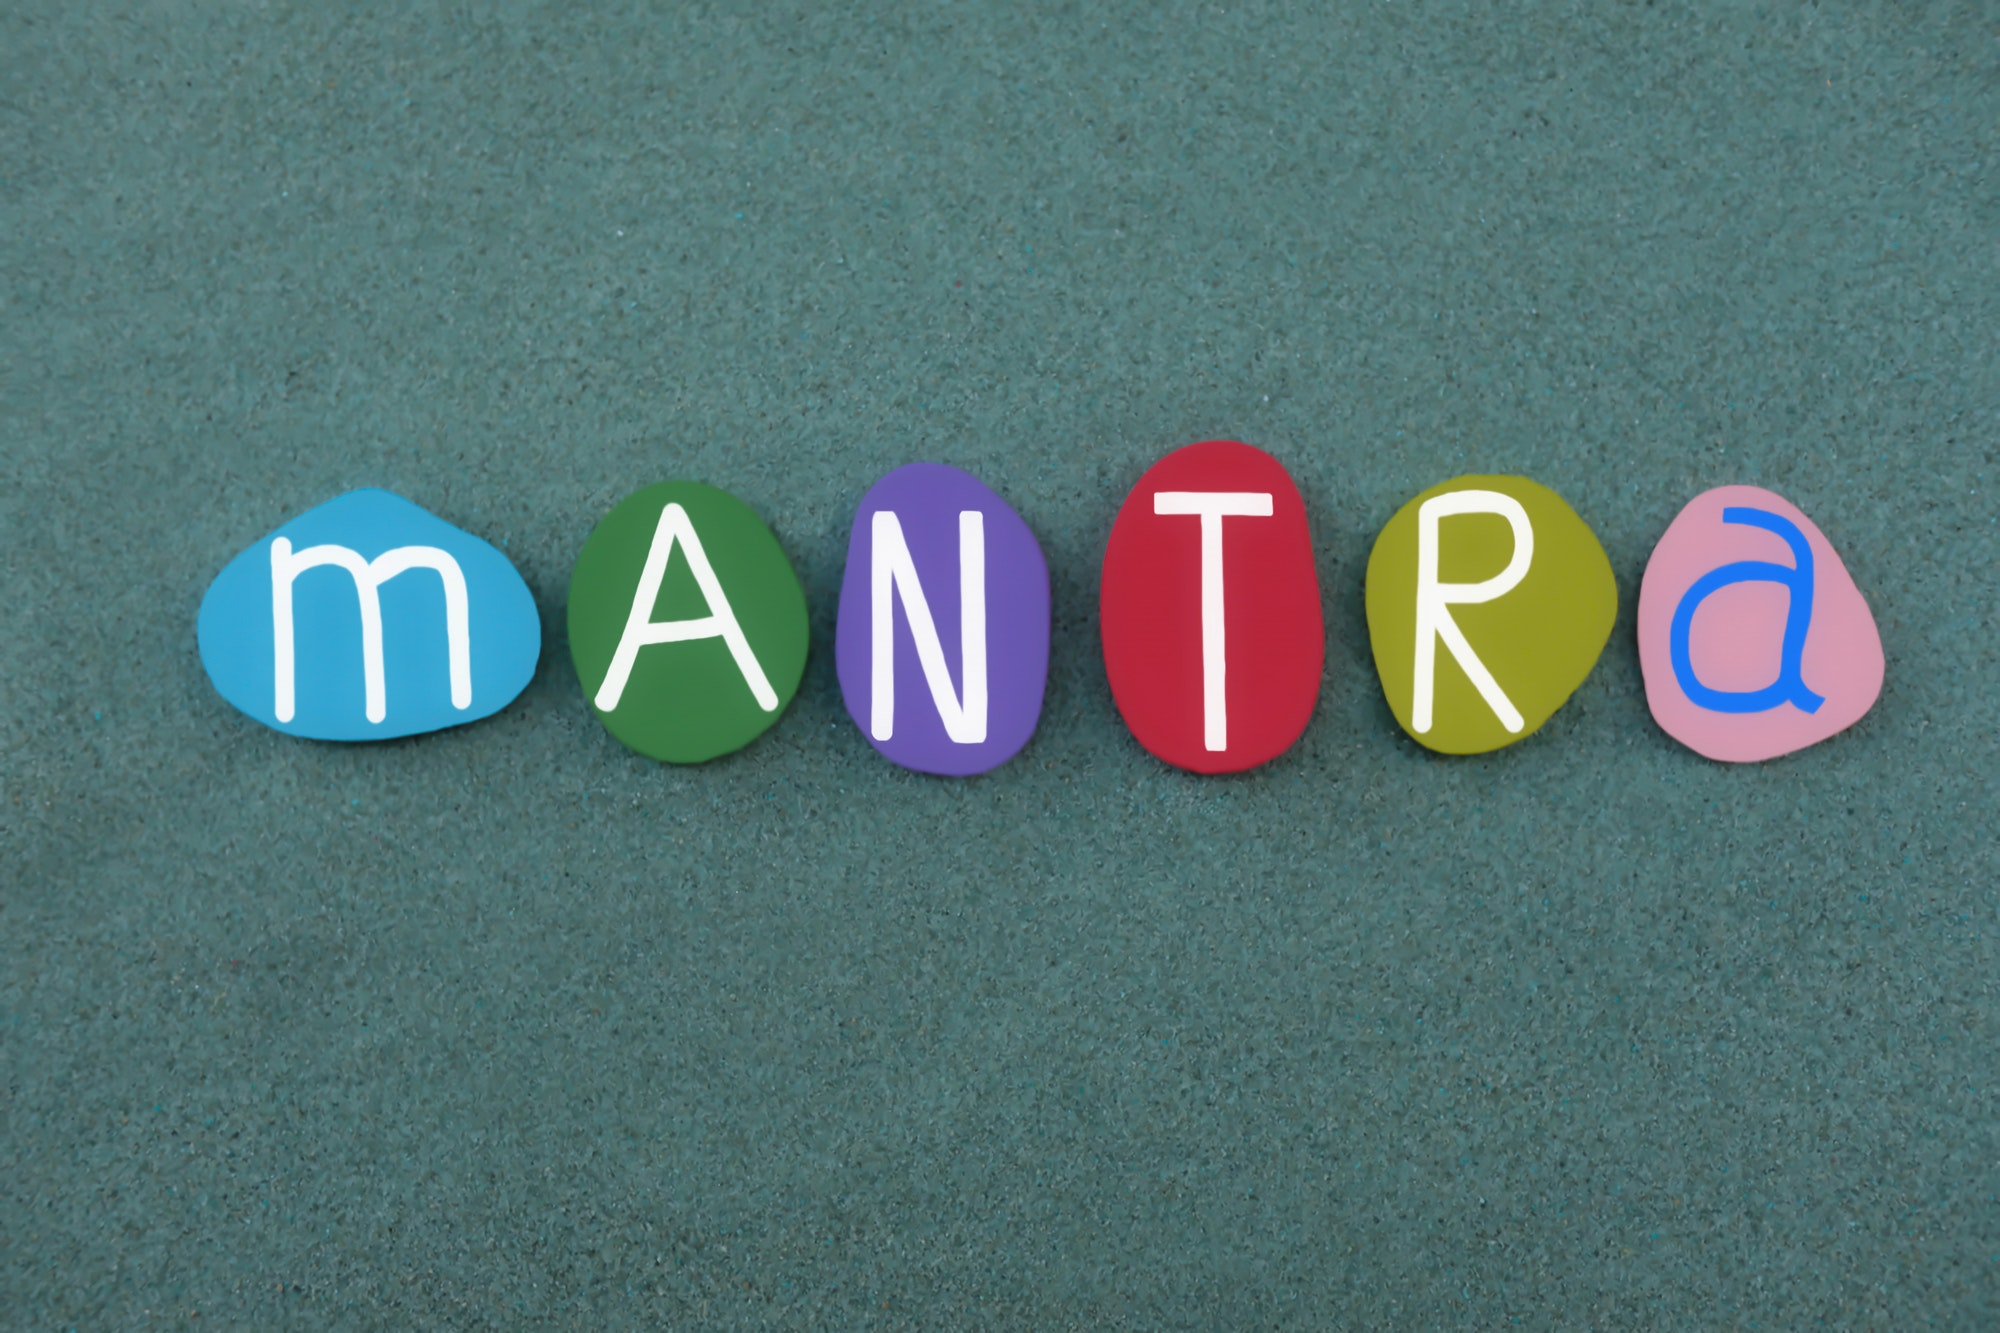 Mantra, motivating chant, usually any repeated word or phrase, text composed with colored letters